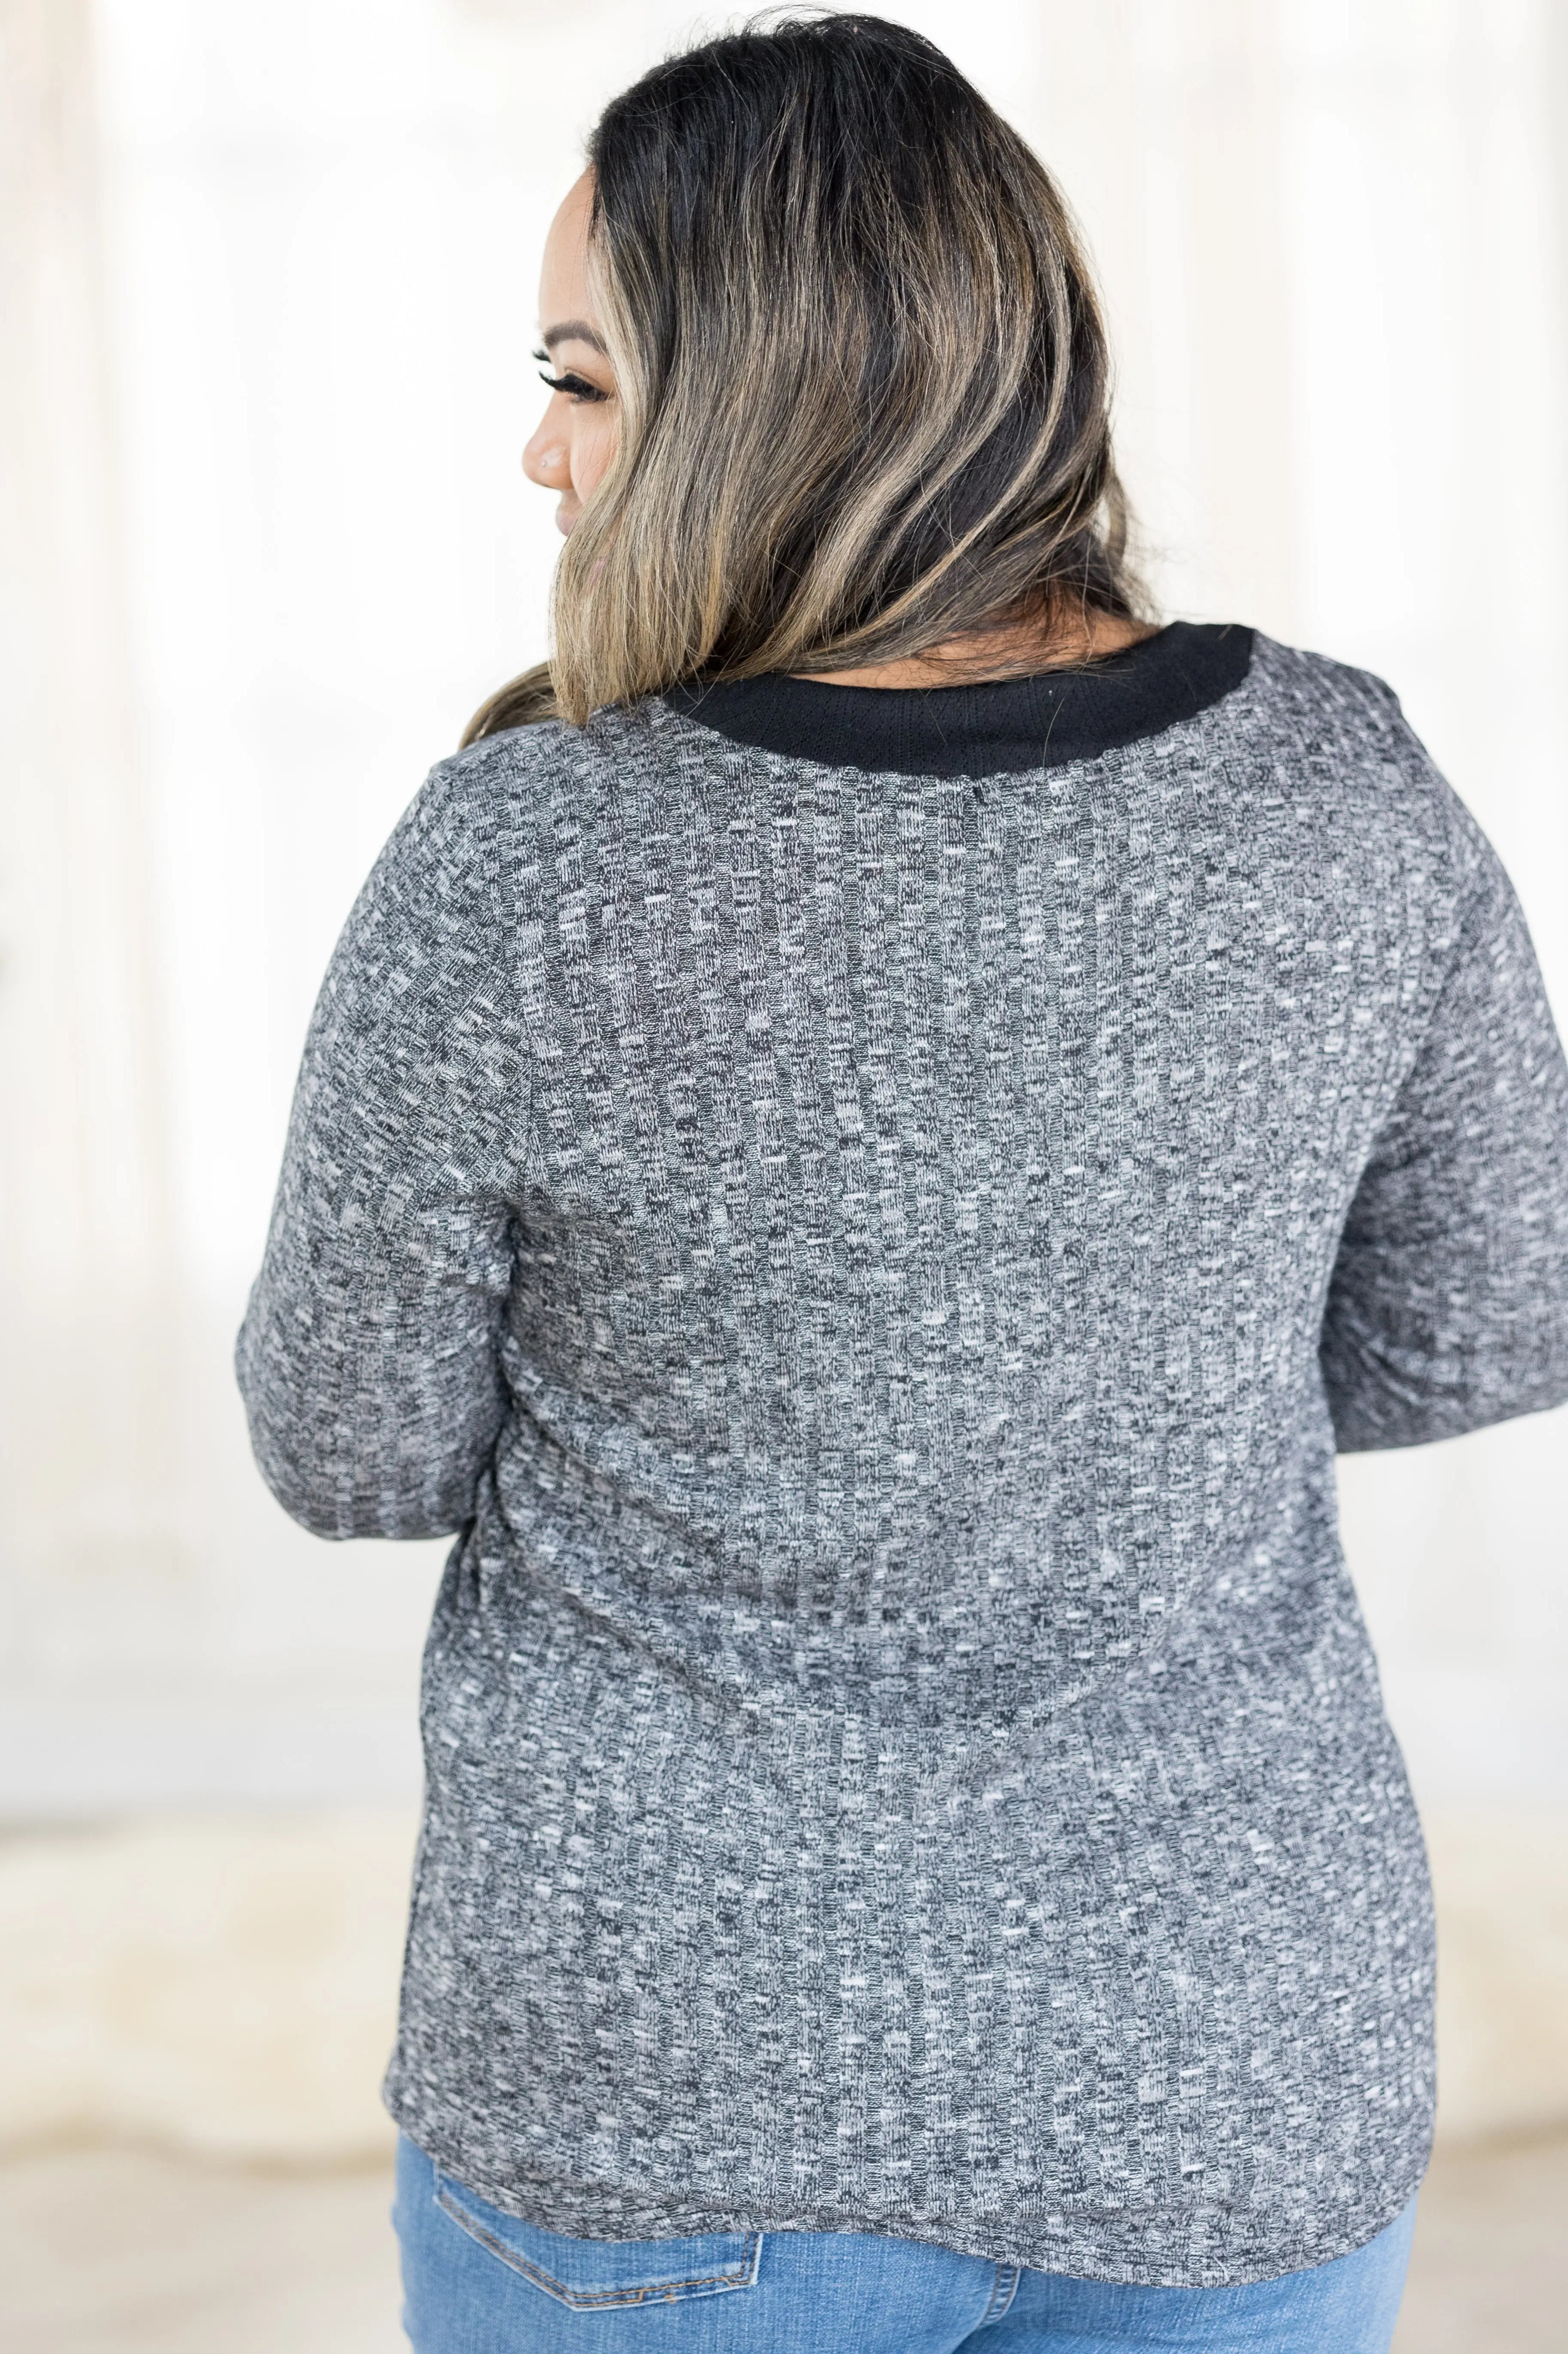 You're All That I Want - Thumbhole Top Boutique Simplified